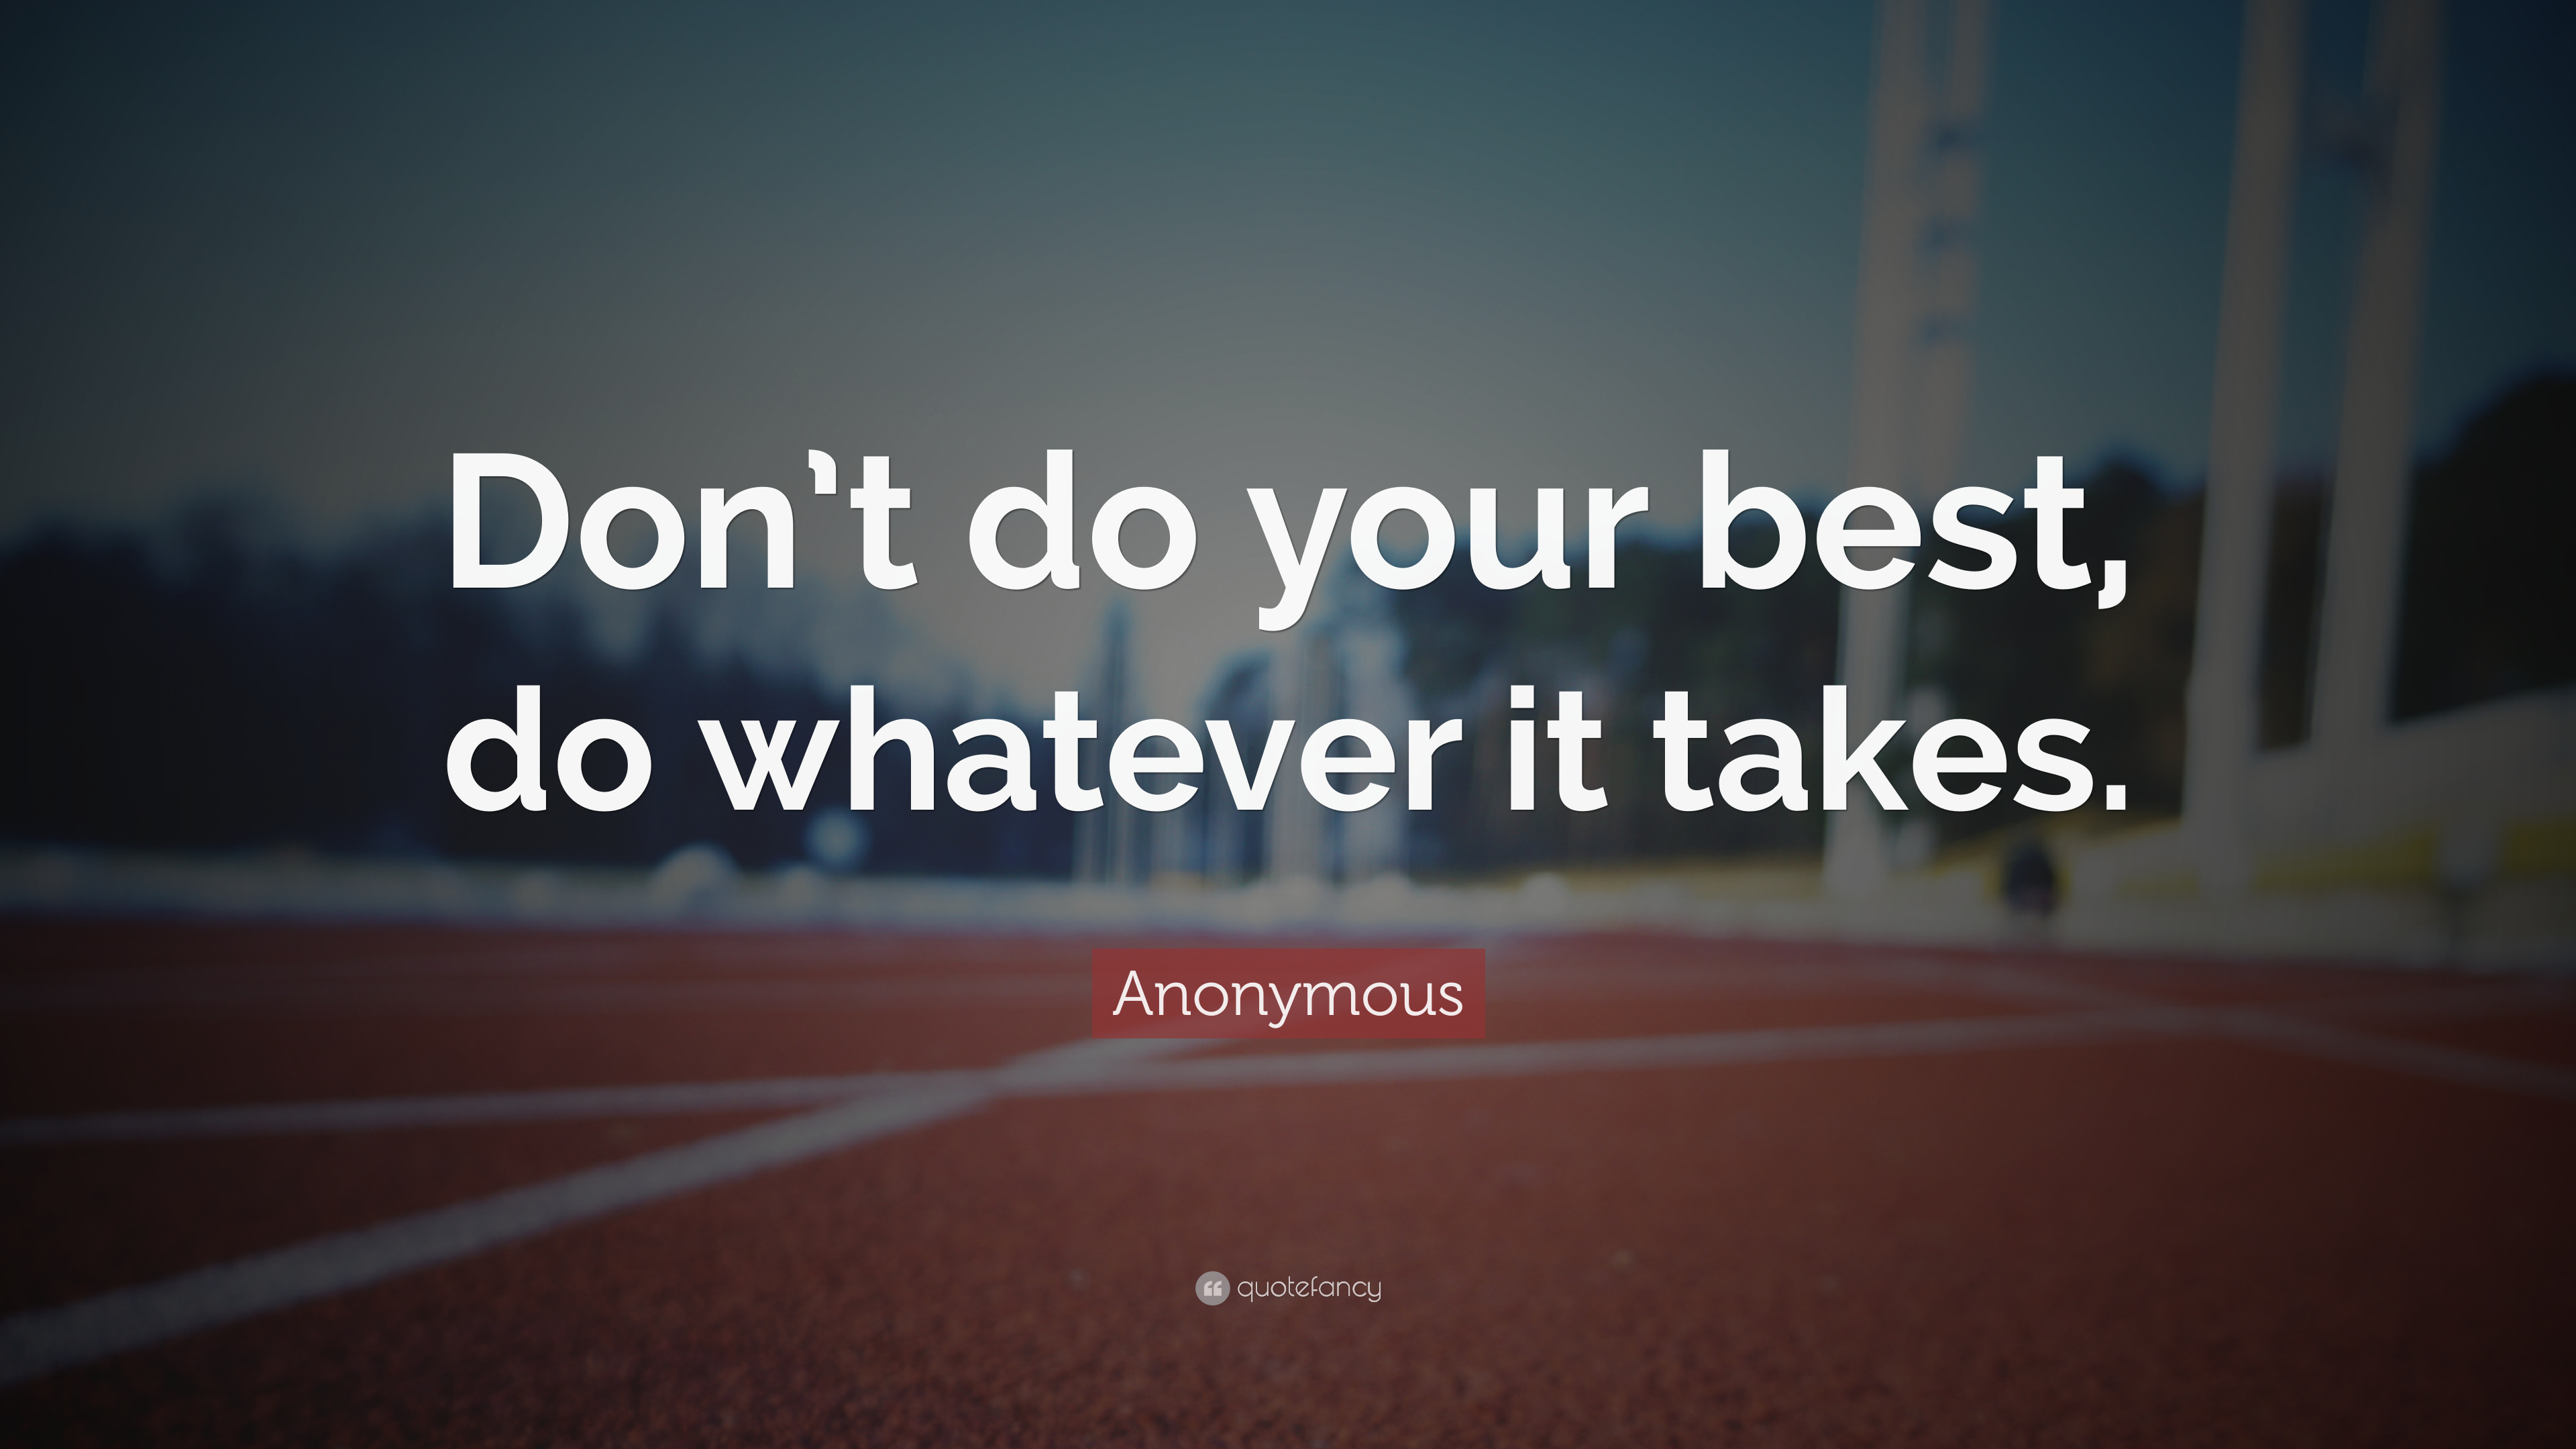 Anonymous Quote: “Don't do your best, do whatever it takes